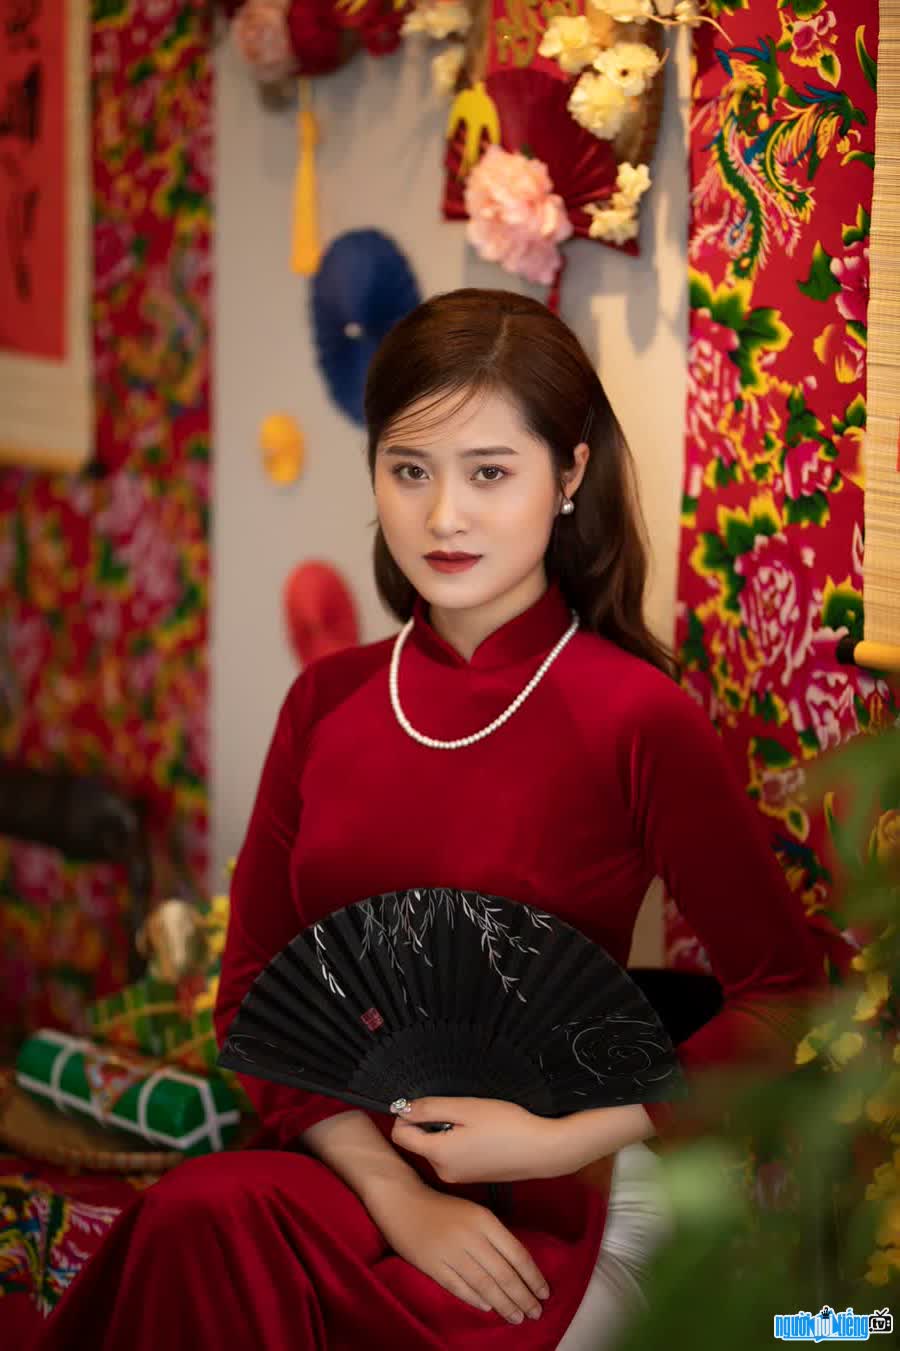 Nguyen Thai Ha is currently a student at Vietnam Women's Academy